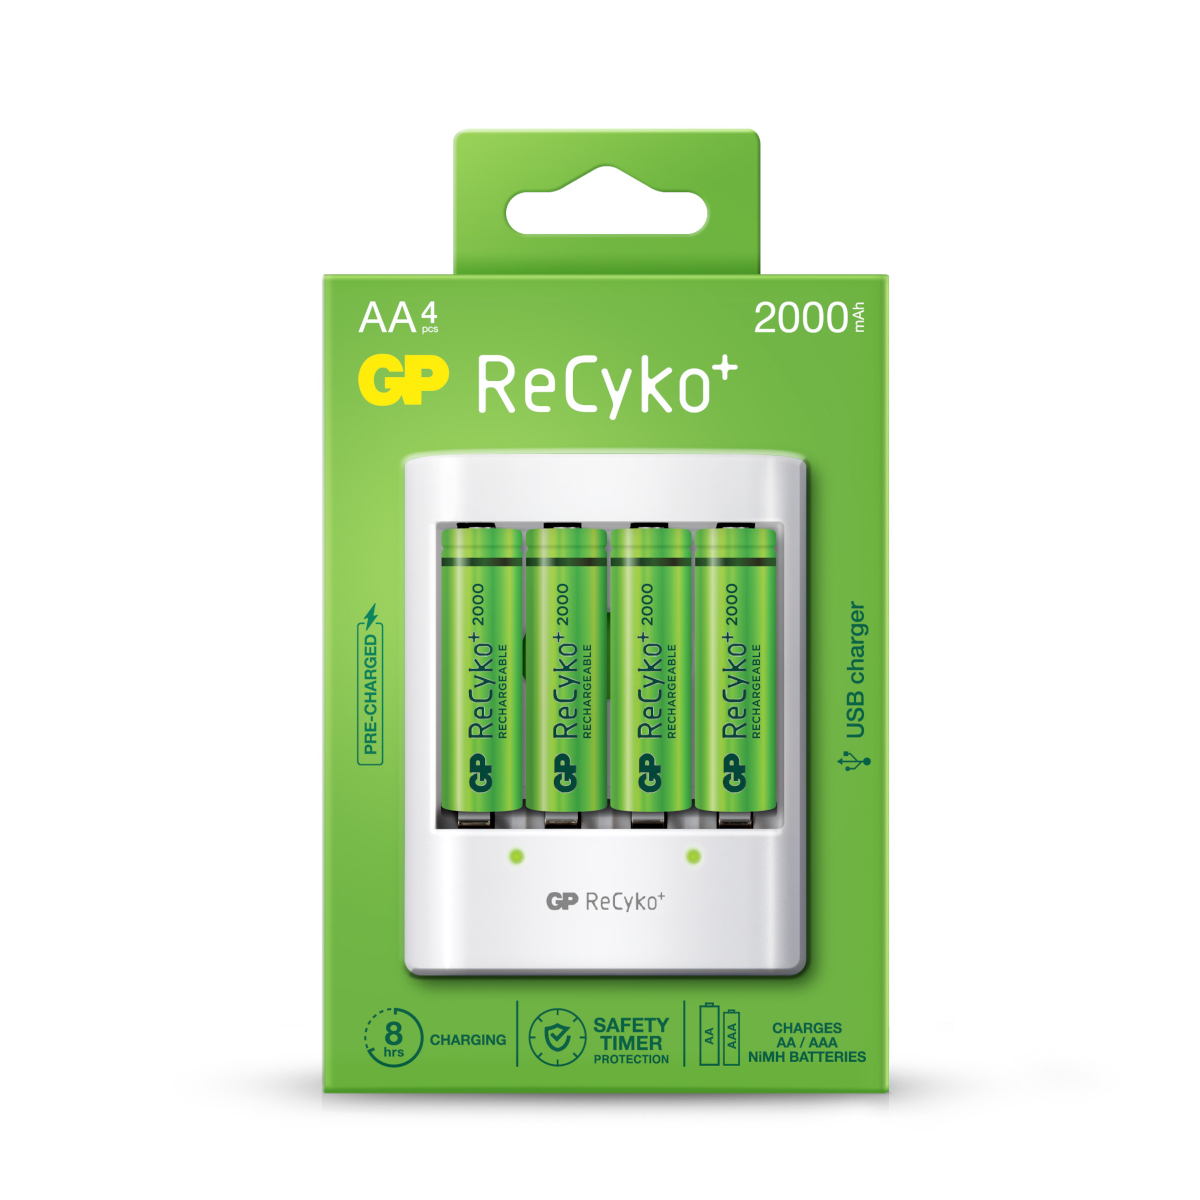 4-channel charger + 4 ReCyKo 2100mAh rechargeable batteries